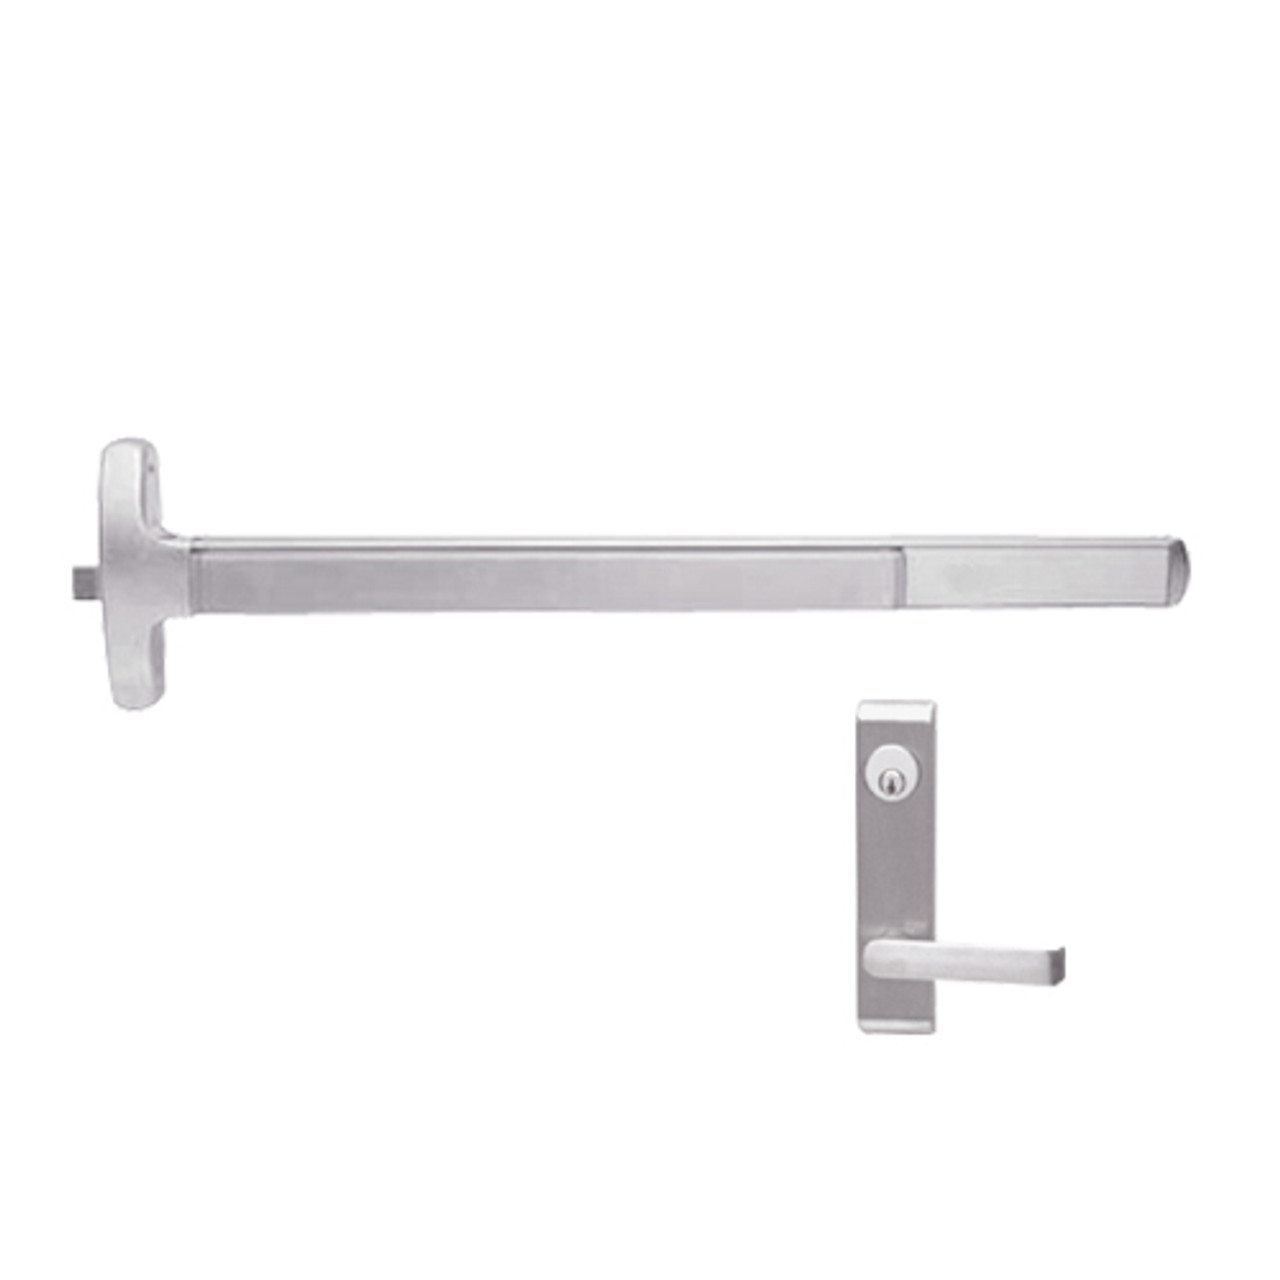 F-24-R-L-NL-DANE-US32-3-RHR Falcon Exit Device in Polished Stainless Steel